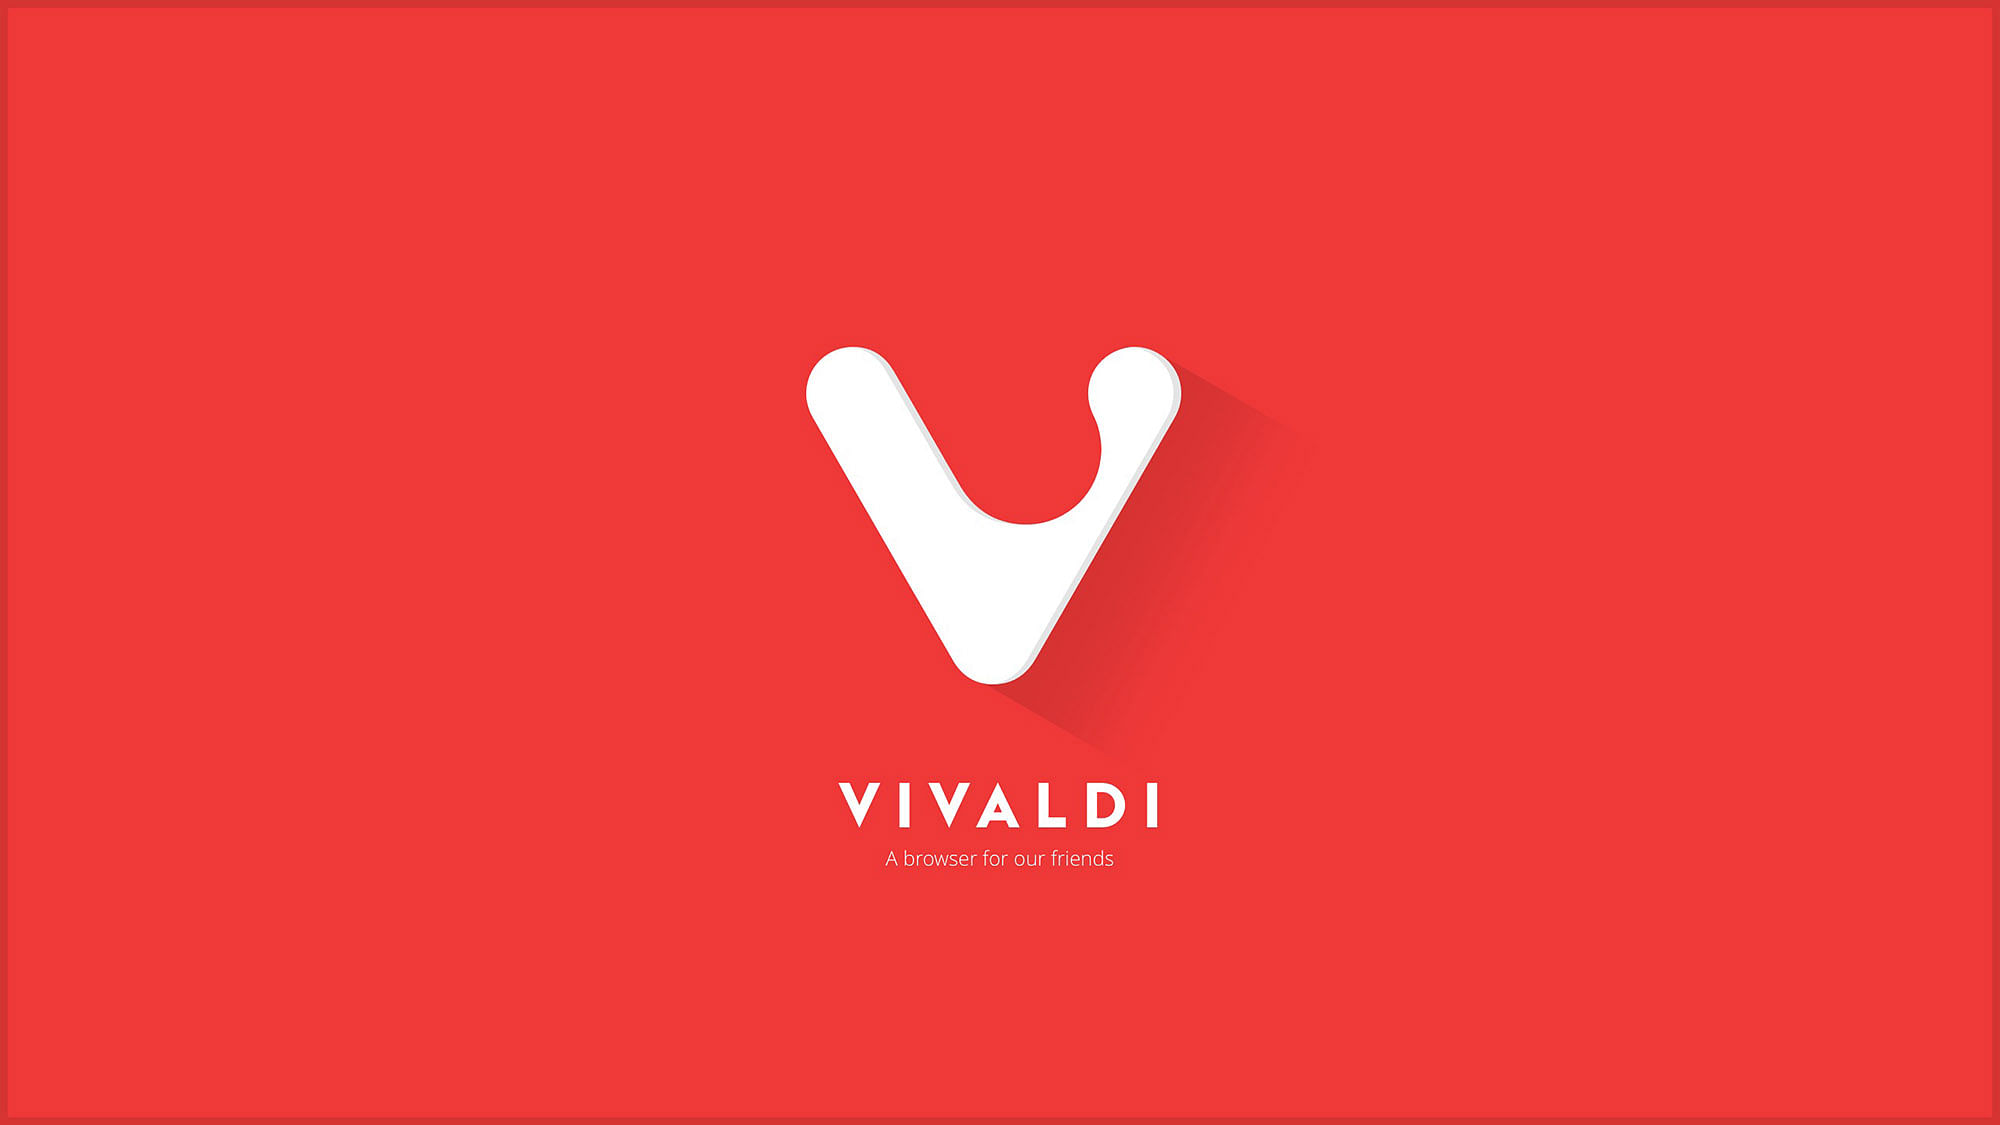 Vivaldi web browser has been made by the co-founder of Opera. (Photo: Vivaldi)&nbsp;